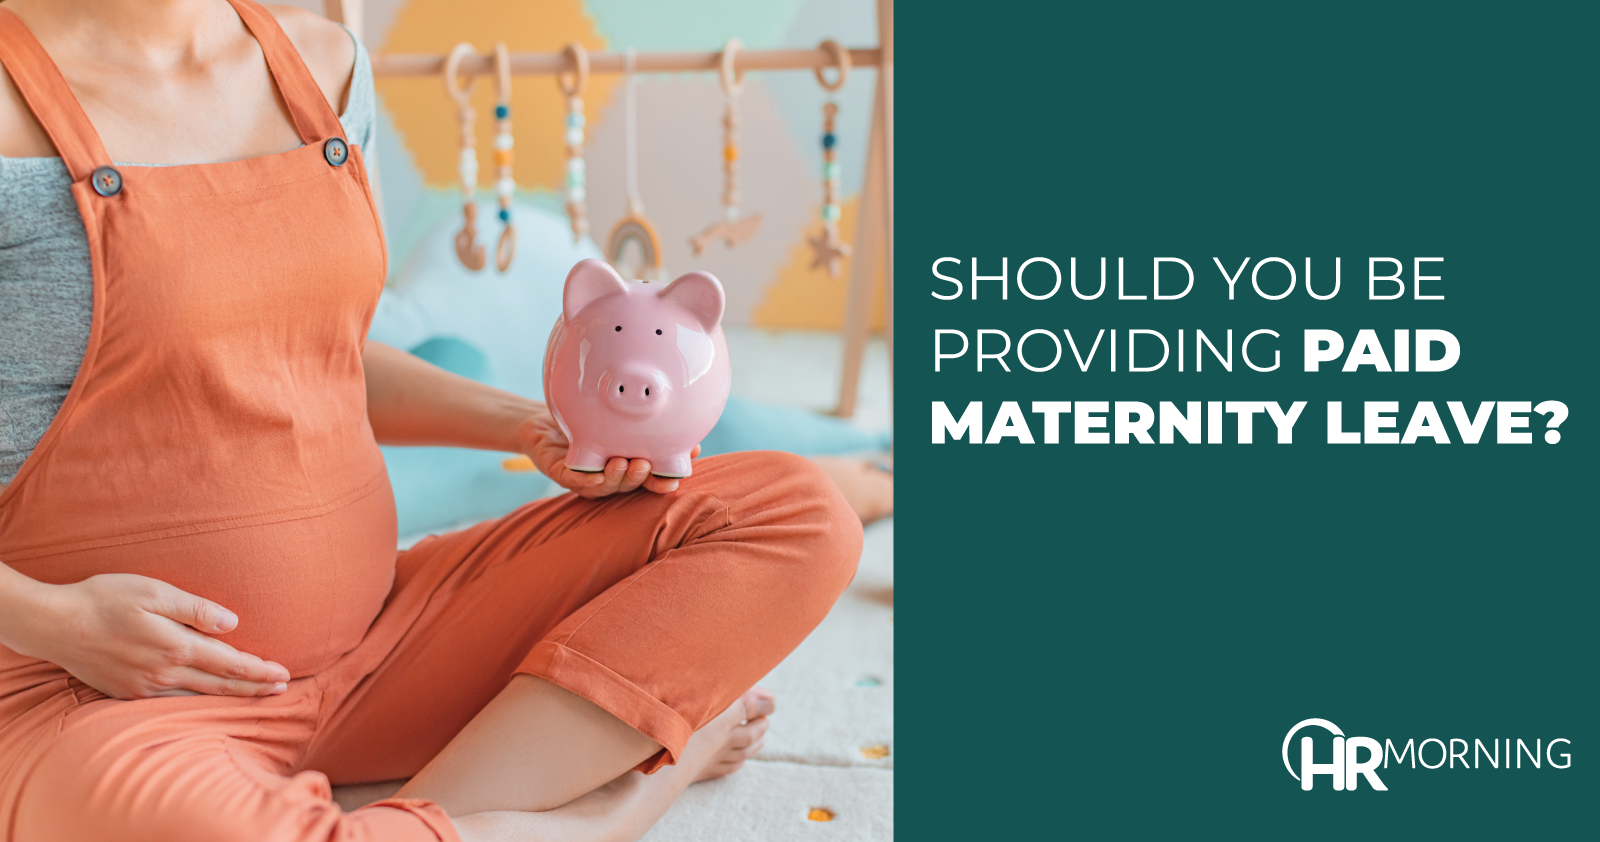 Should you be providing paid maternity leave?